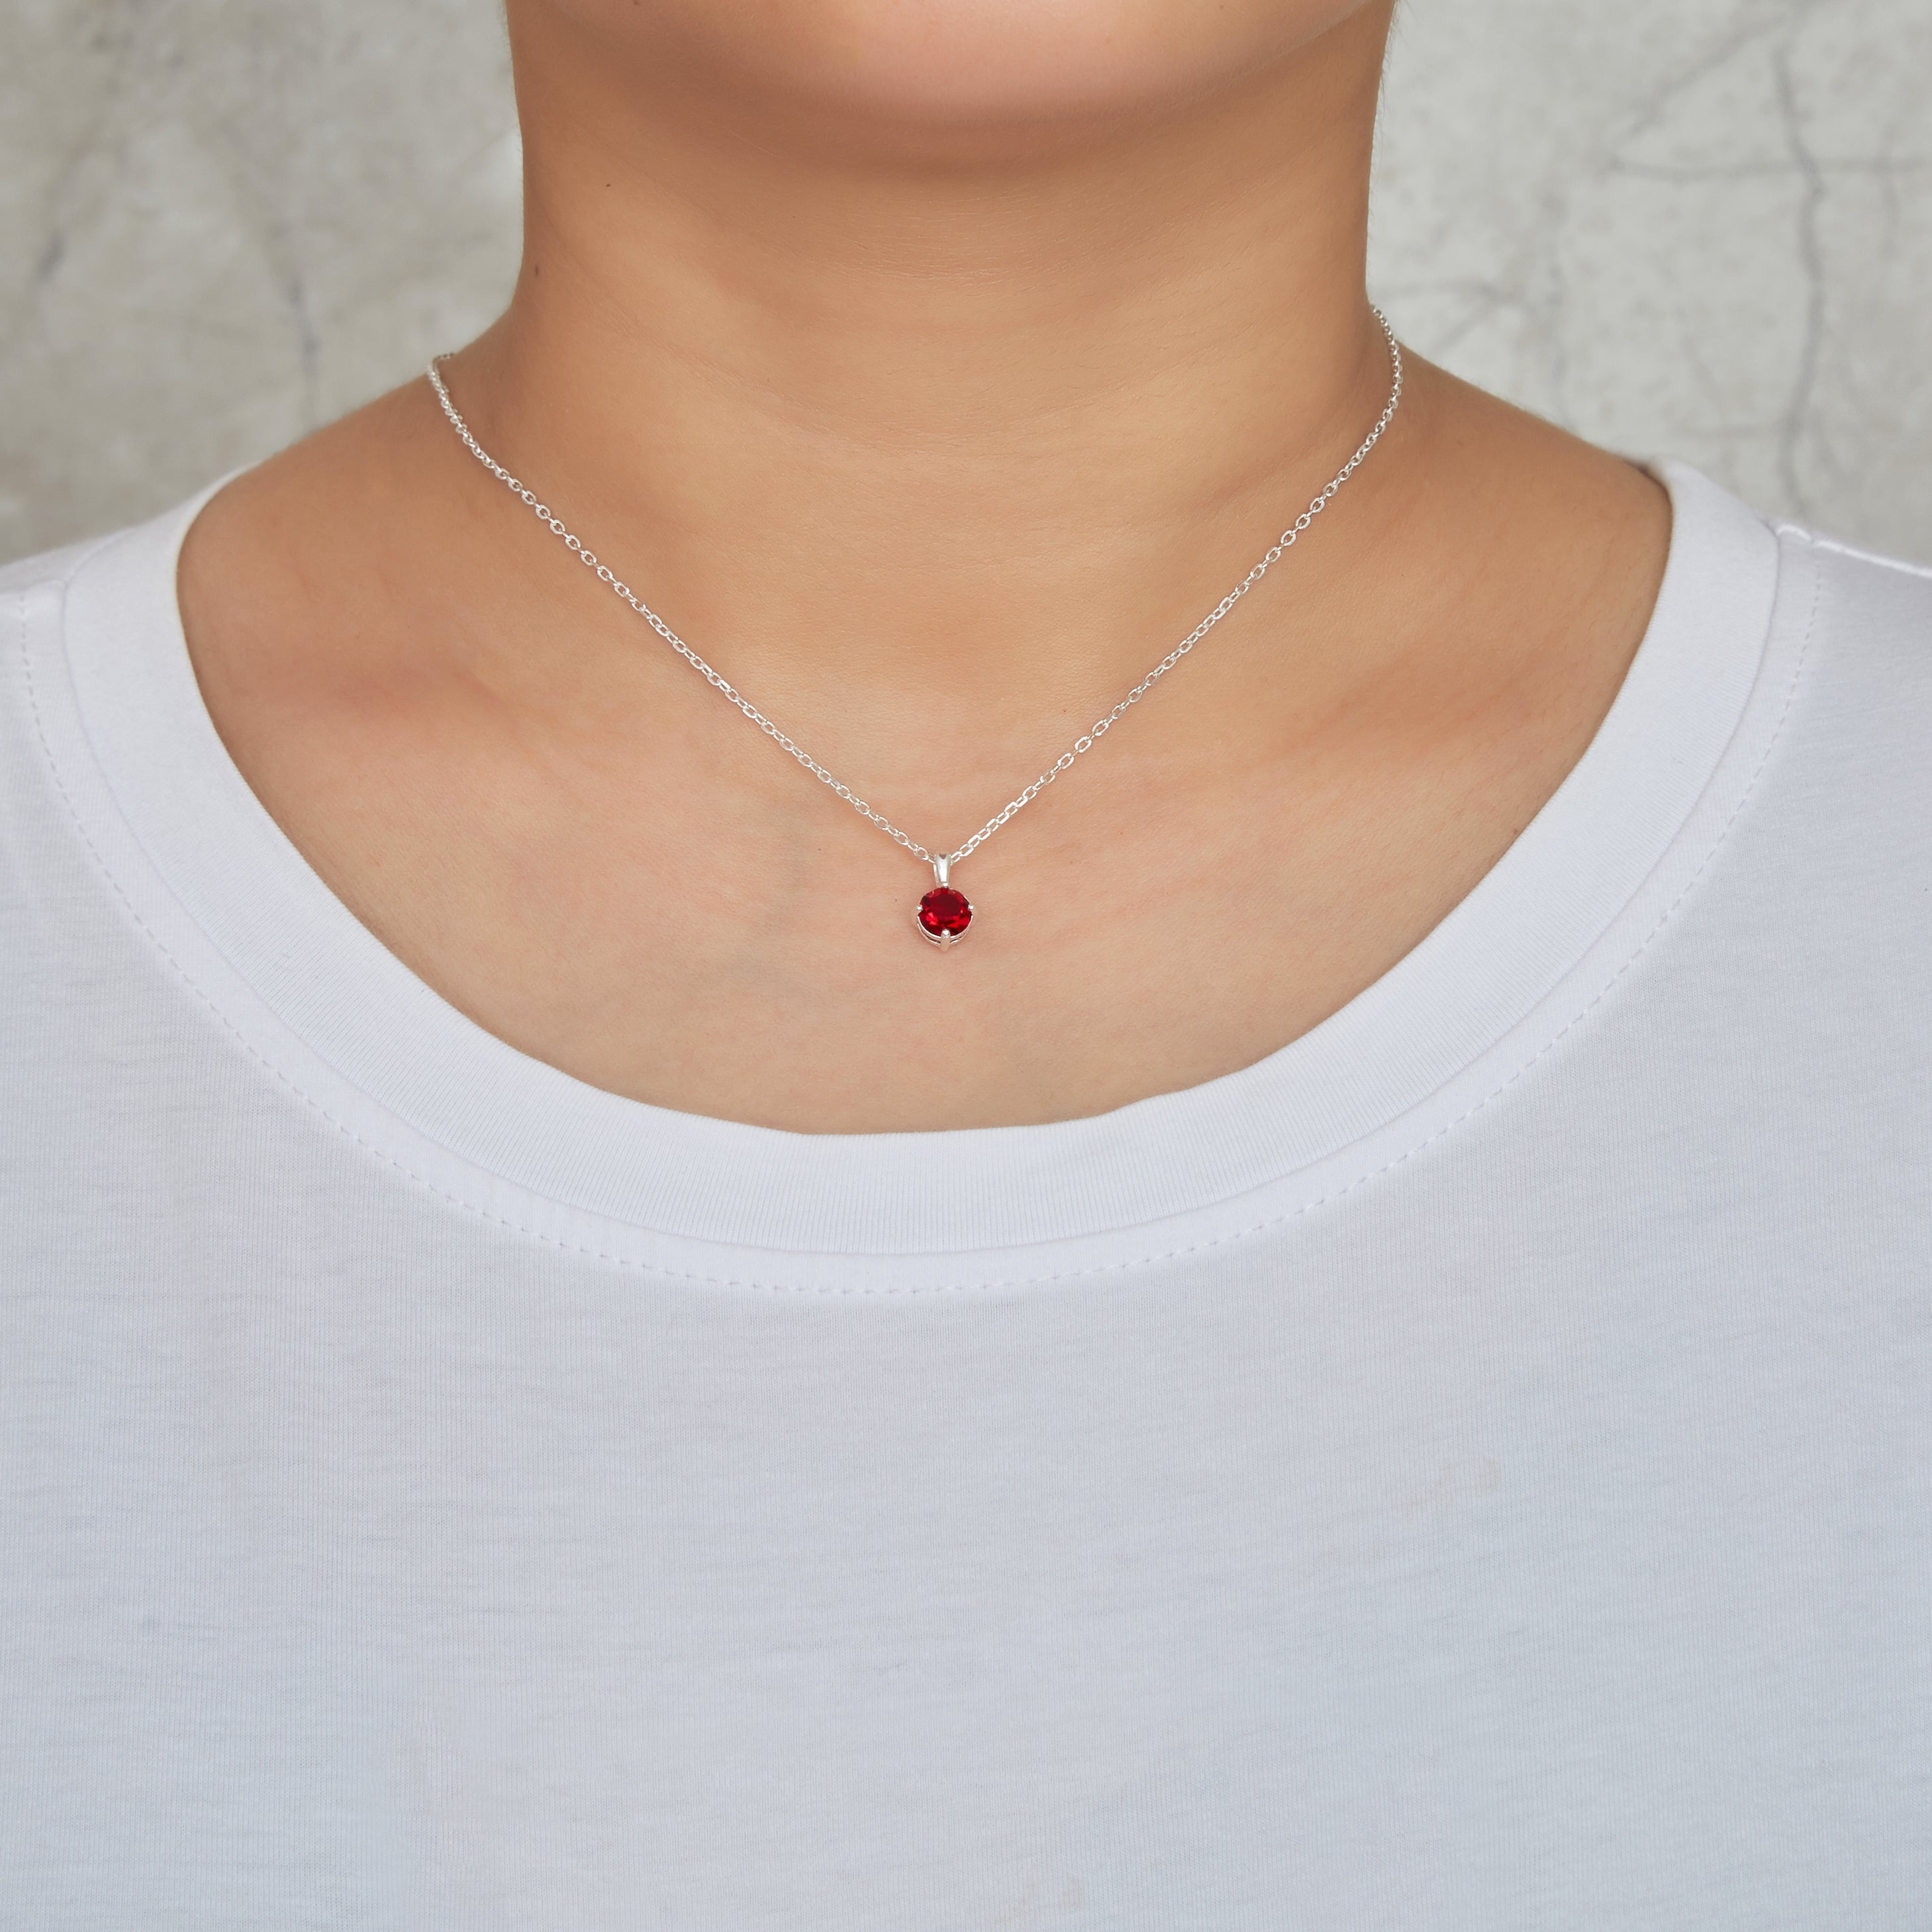 Sterling Silver January (Garnet) Birthstone Necklace Created with Zircondia® Crystals